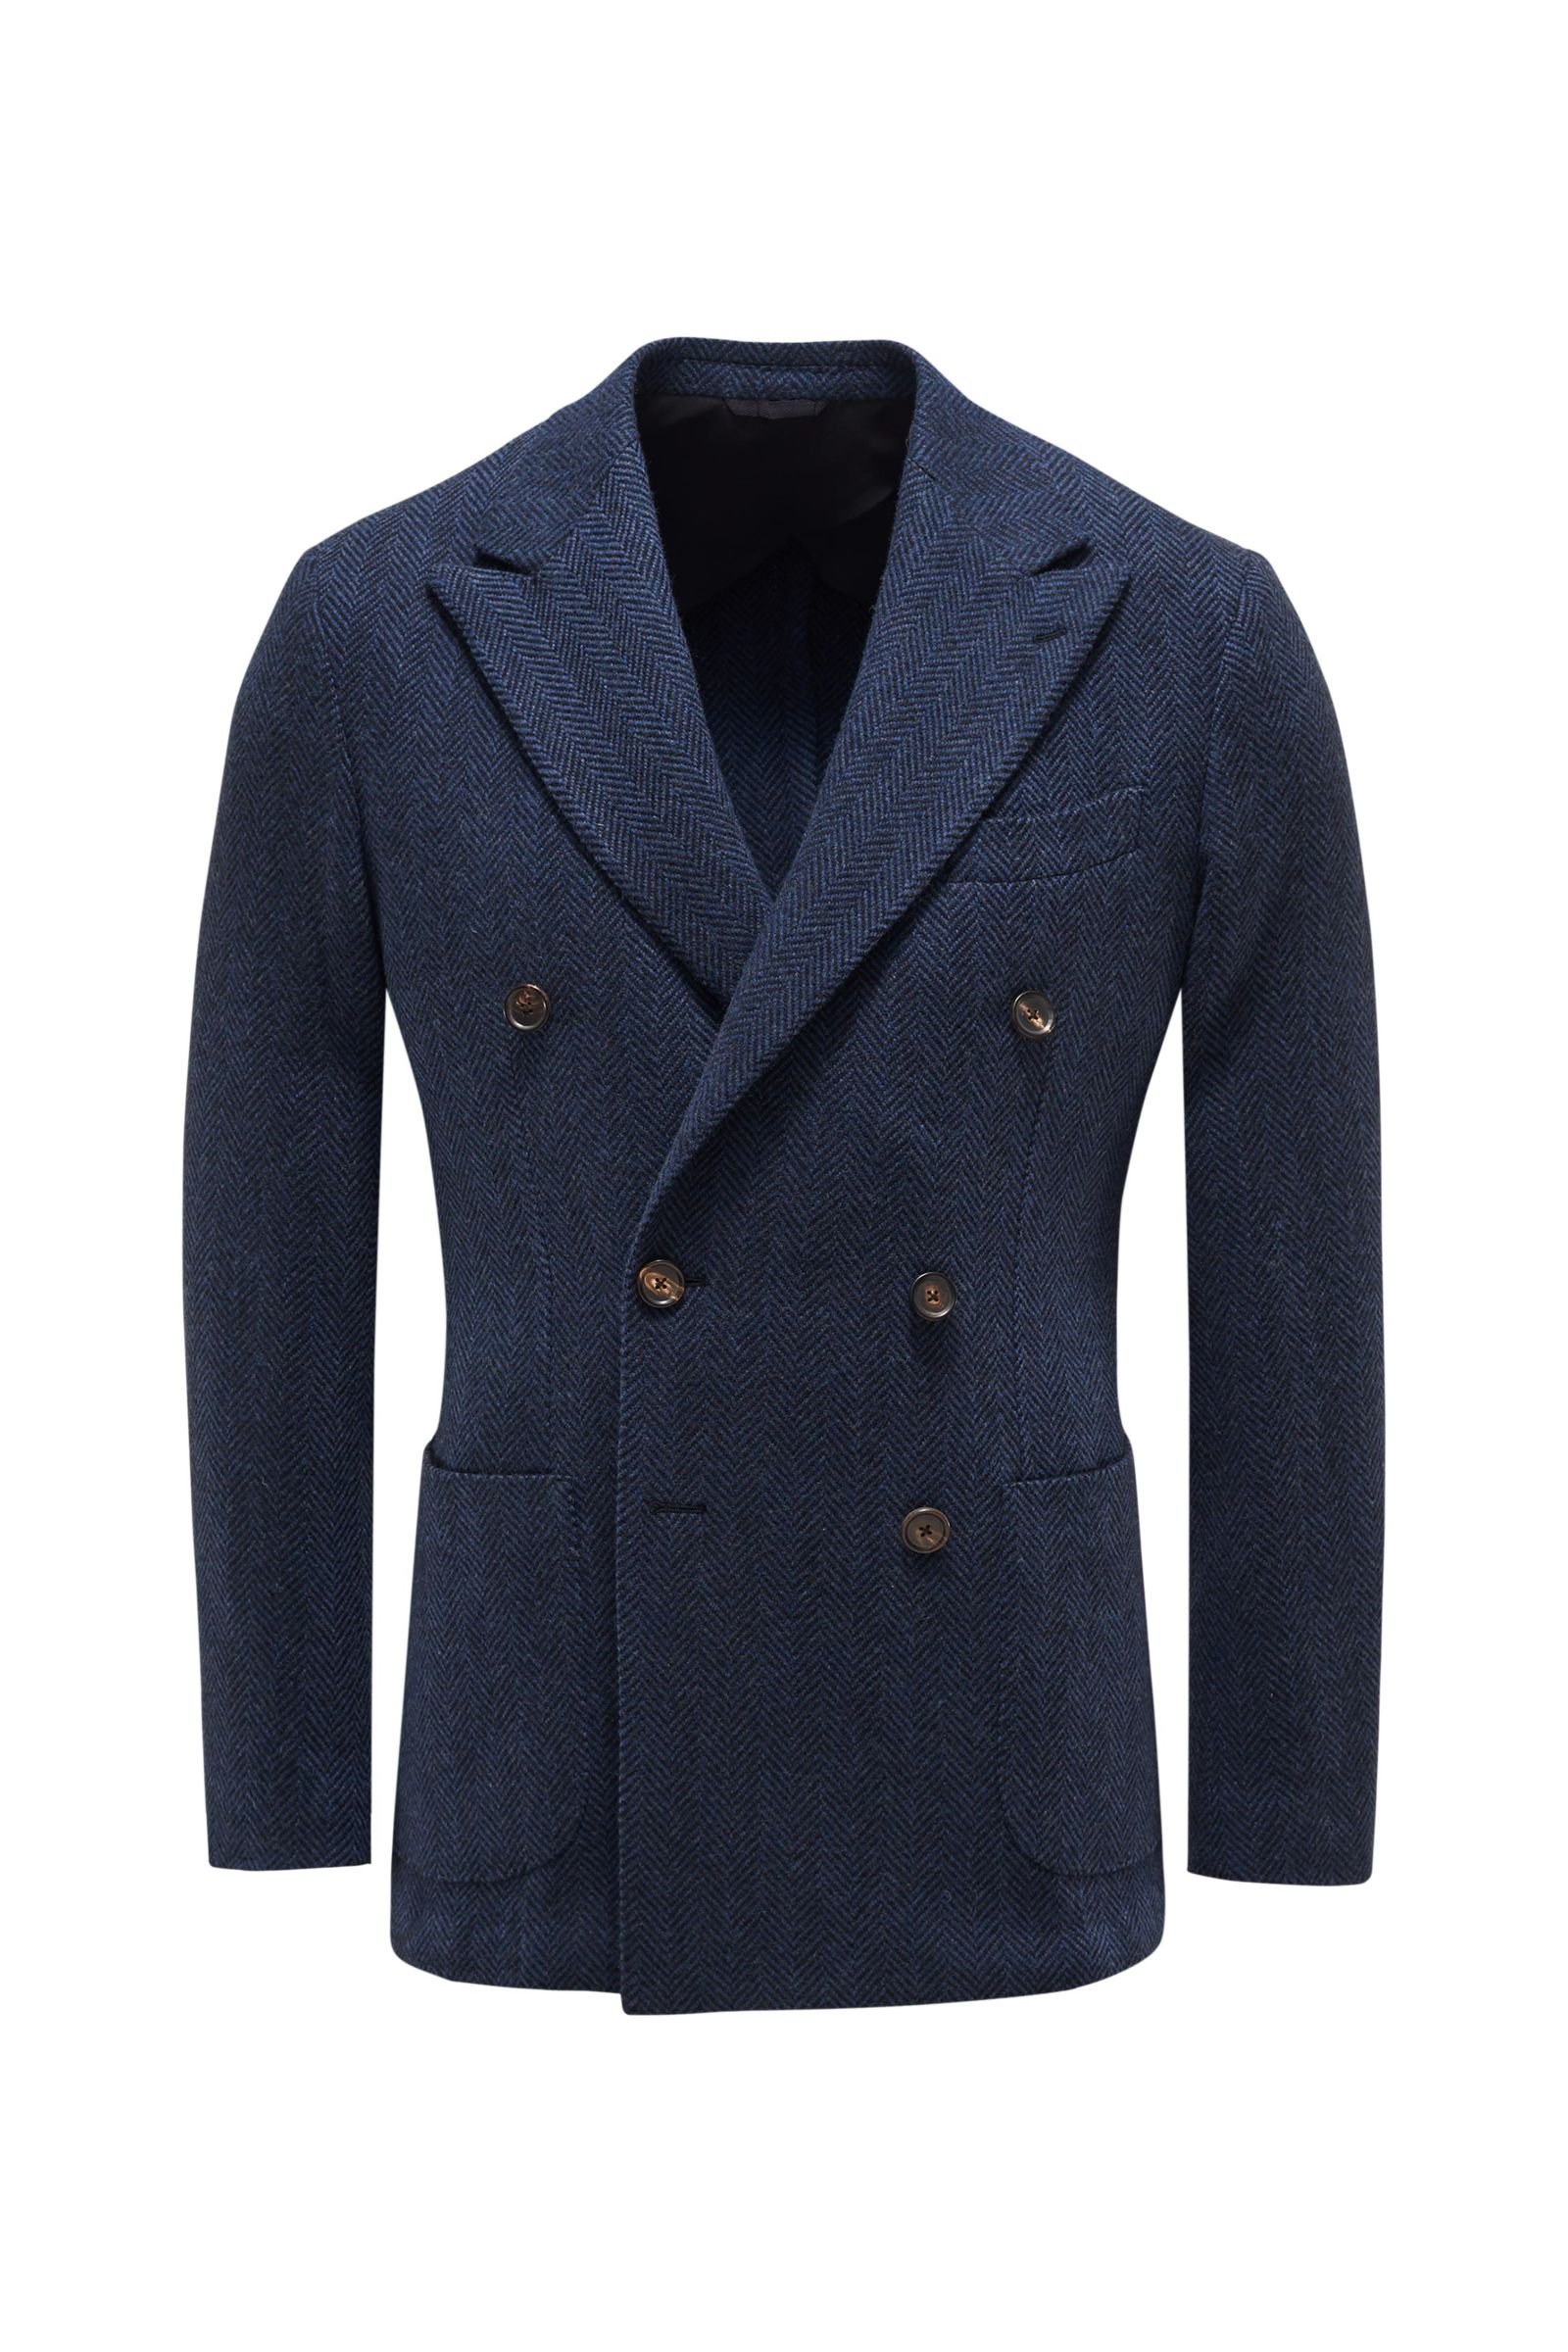 Smart-casual jacket 'Aaradeo' navy patterned